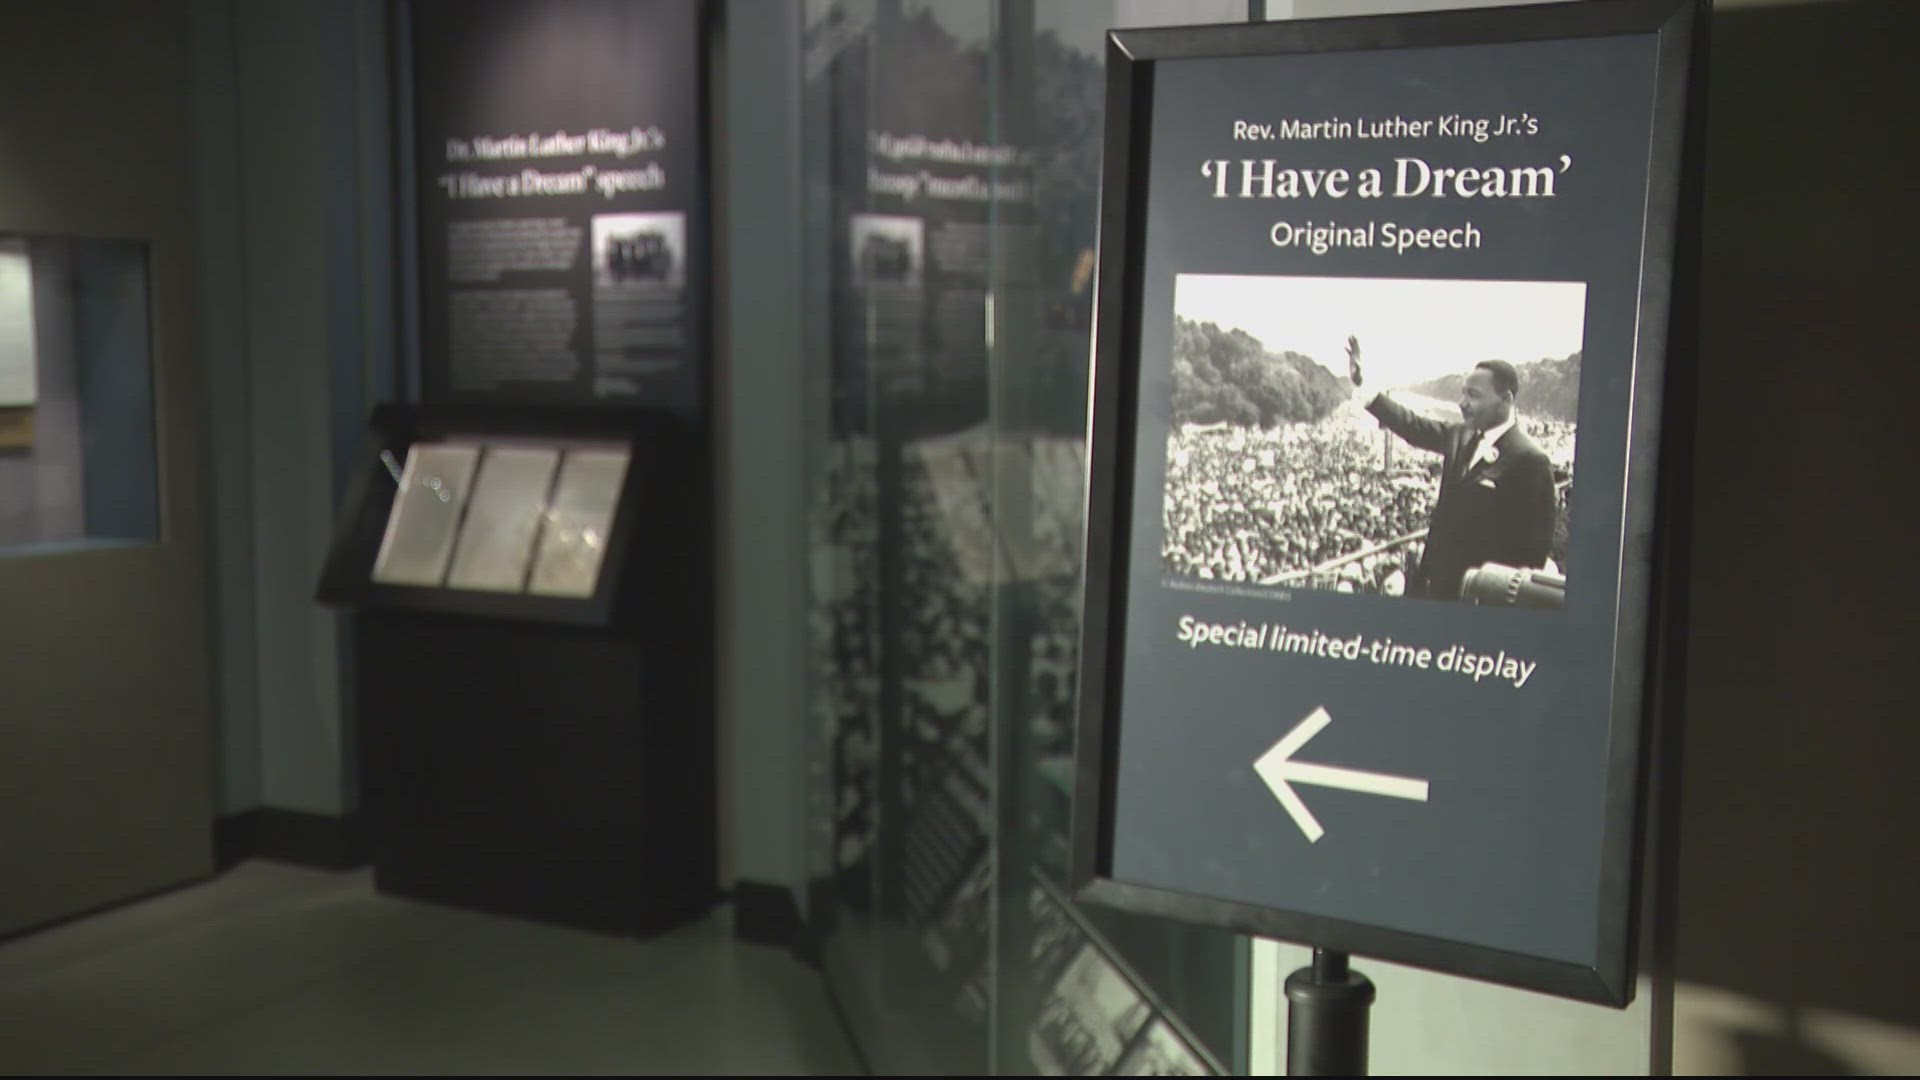 The original manuscript of Dr. Martin Luther King Jr.'s "I Have A Dream" speech is temporarily on display in D.C.